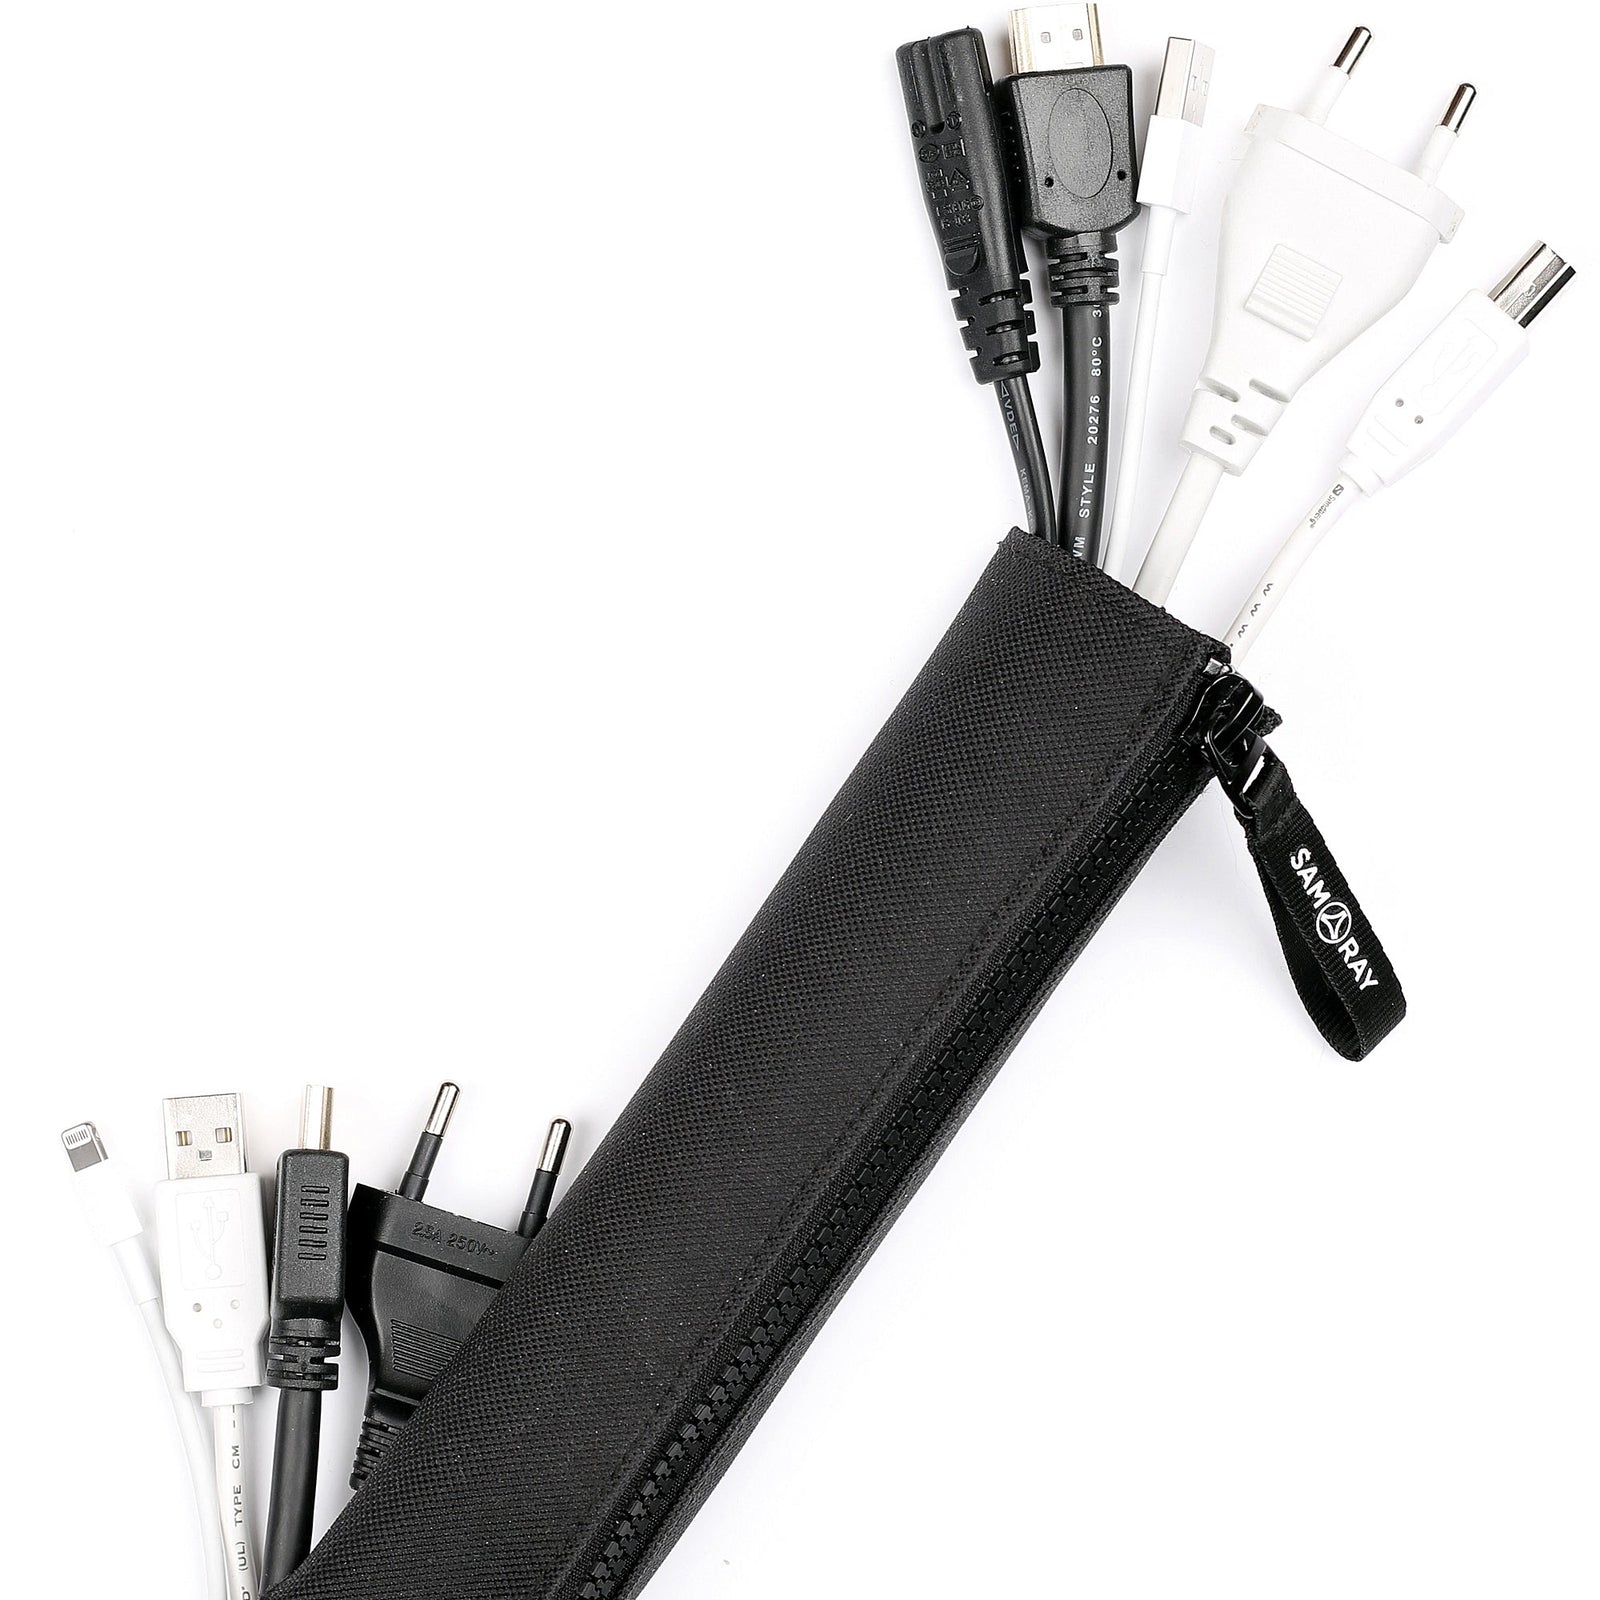 CABLE ORGANIZER MANAGEMENT SLEEVE